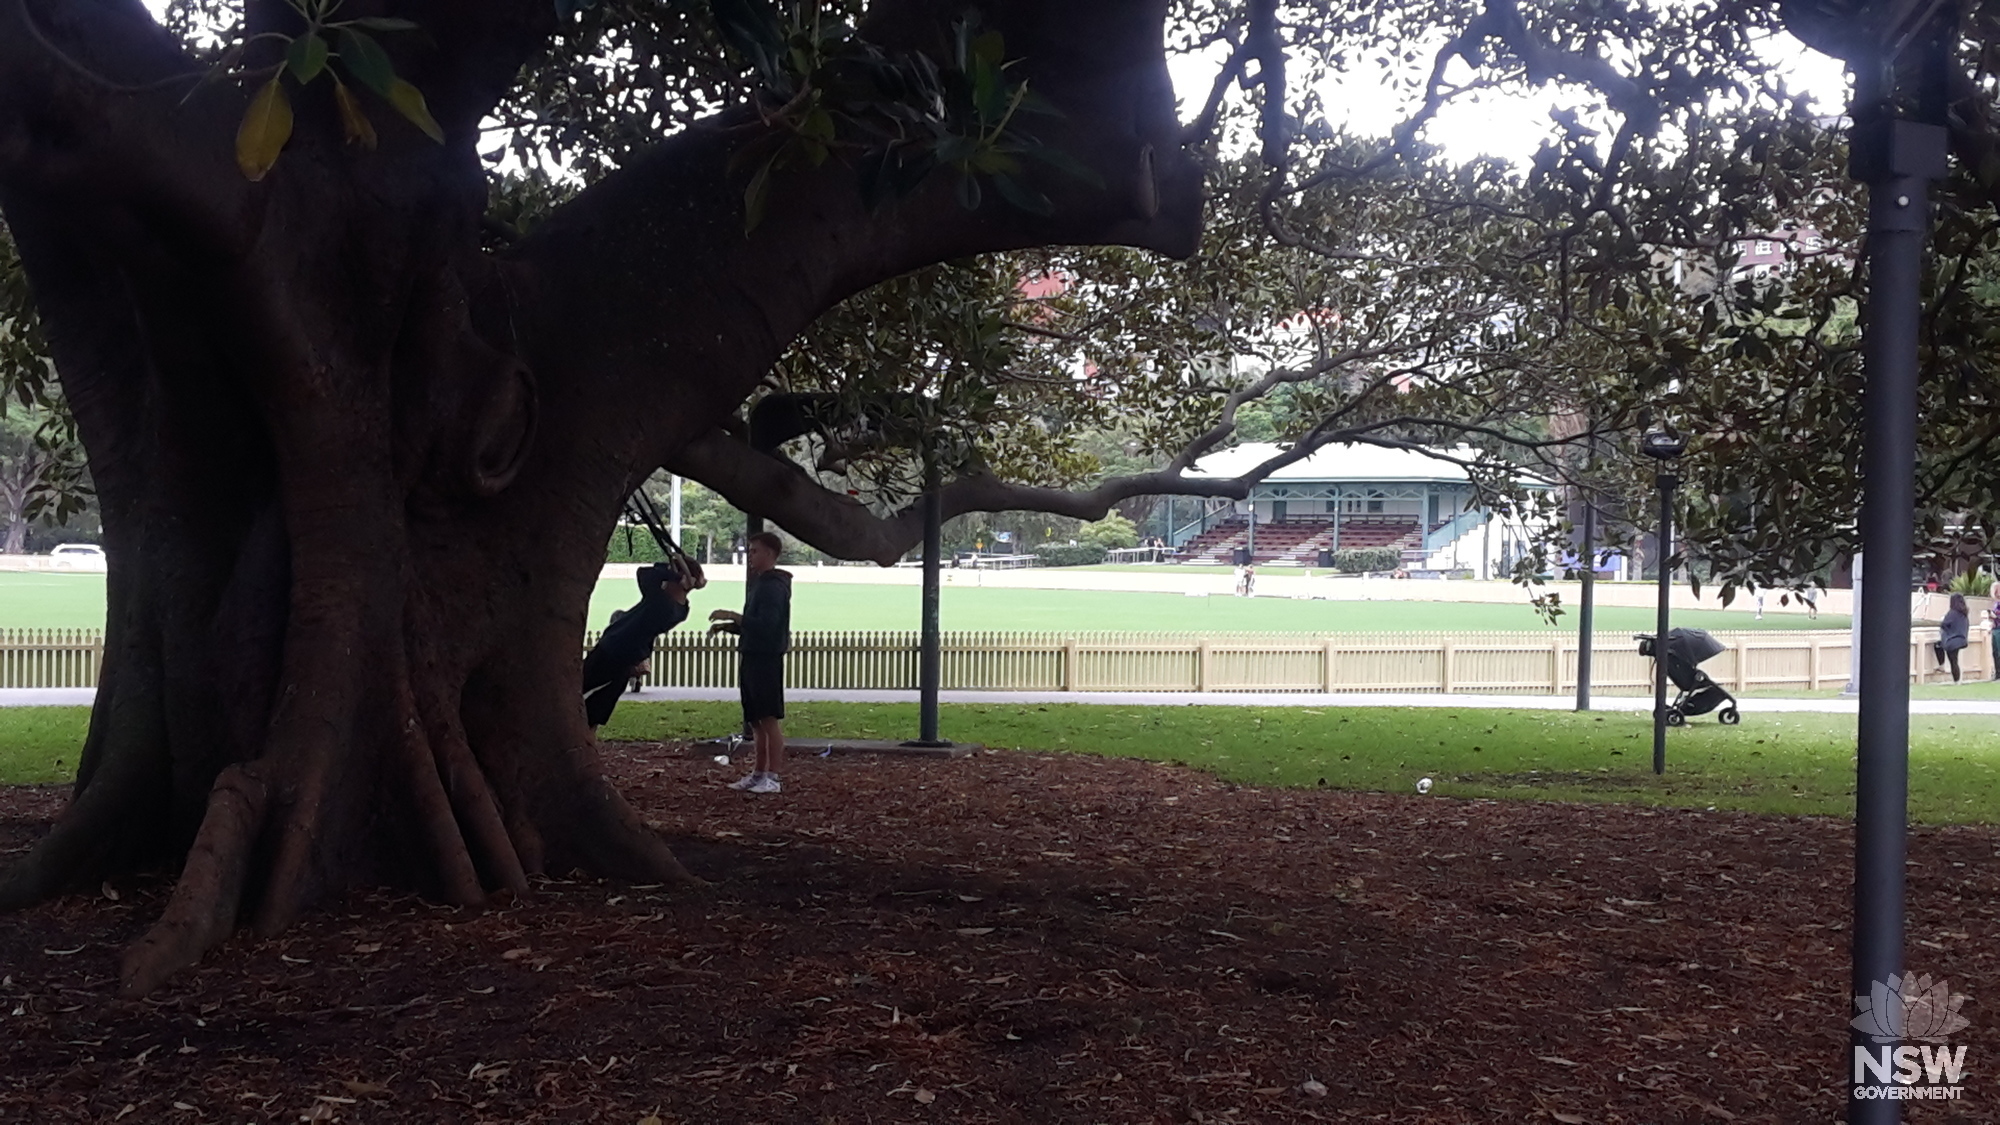 2020 3 26_Rushcutters Bay Park west cricket oval and grandstand_Stuart Read